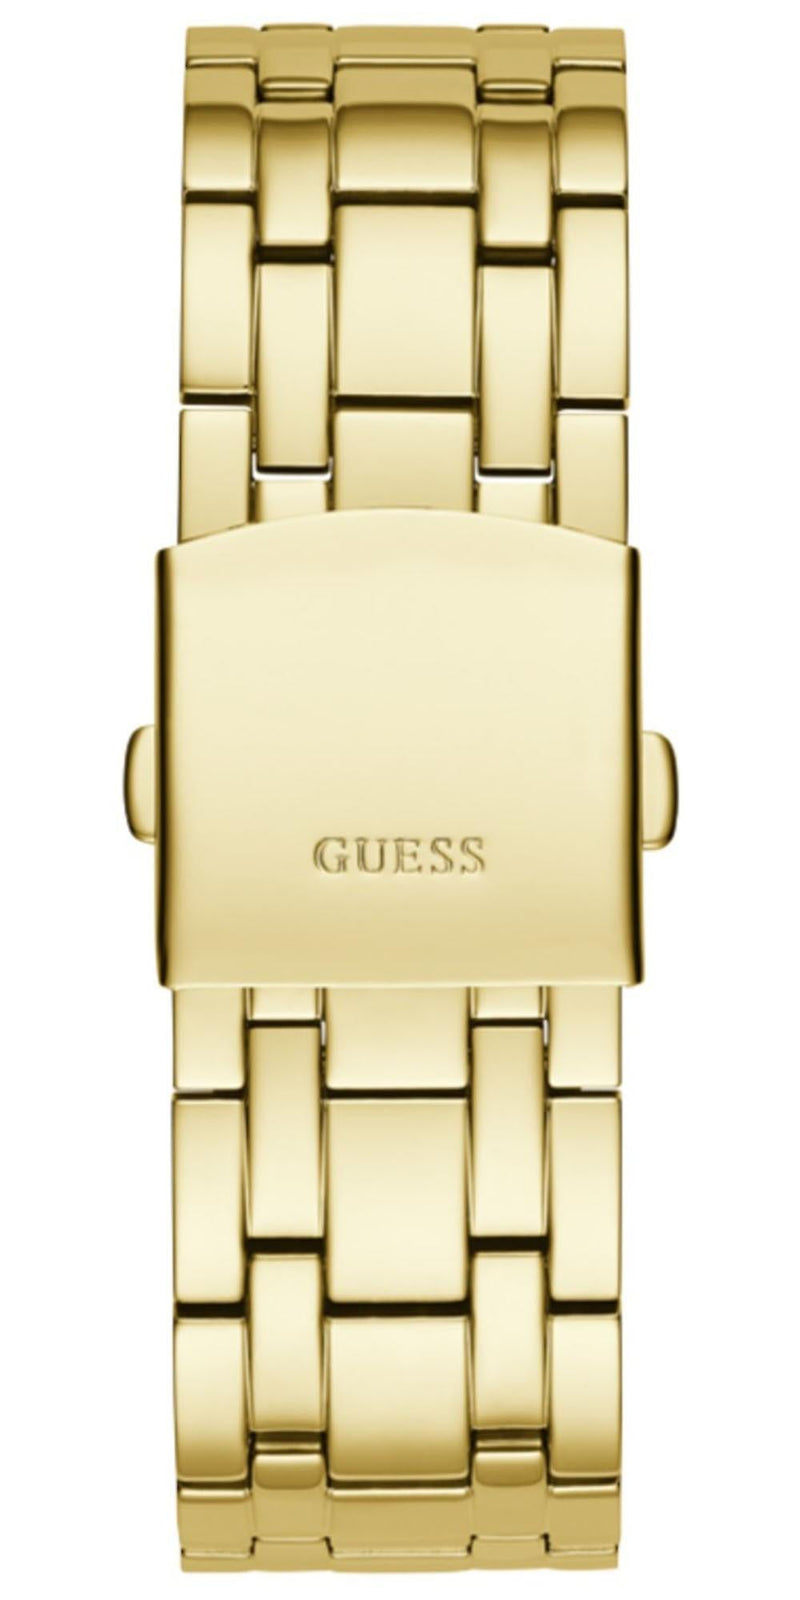 Guess Analog Gold Stainless Steel Men's Watch W15061G2